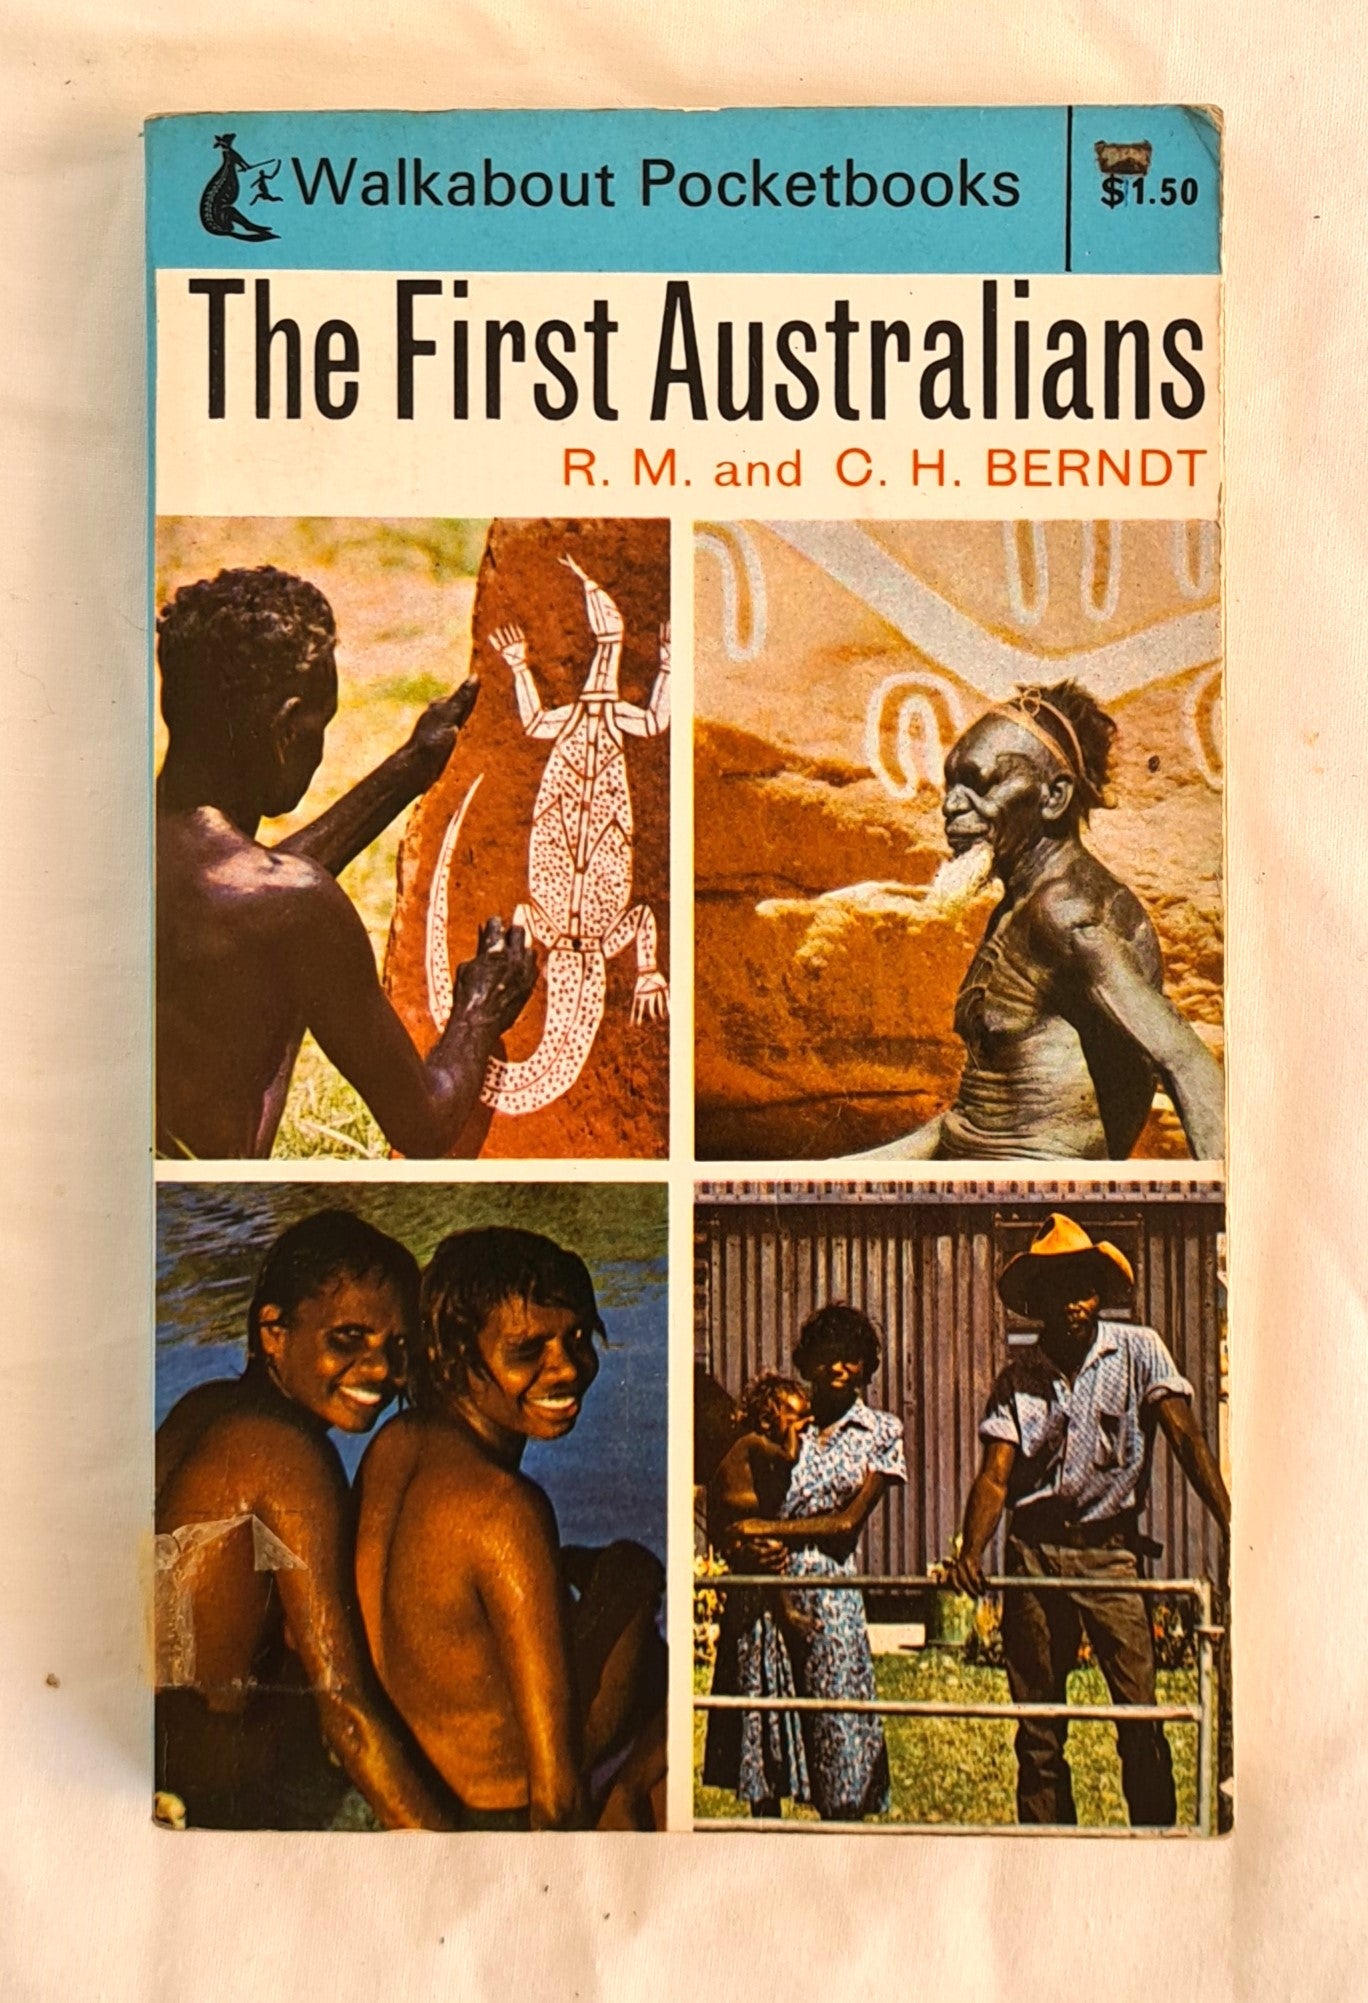 The First Australians  by R. M. and C. H. Berndt  Walkabout Pocketbooks